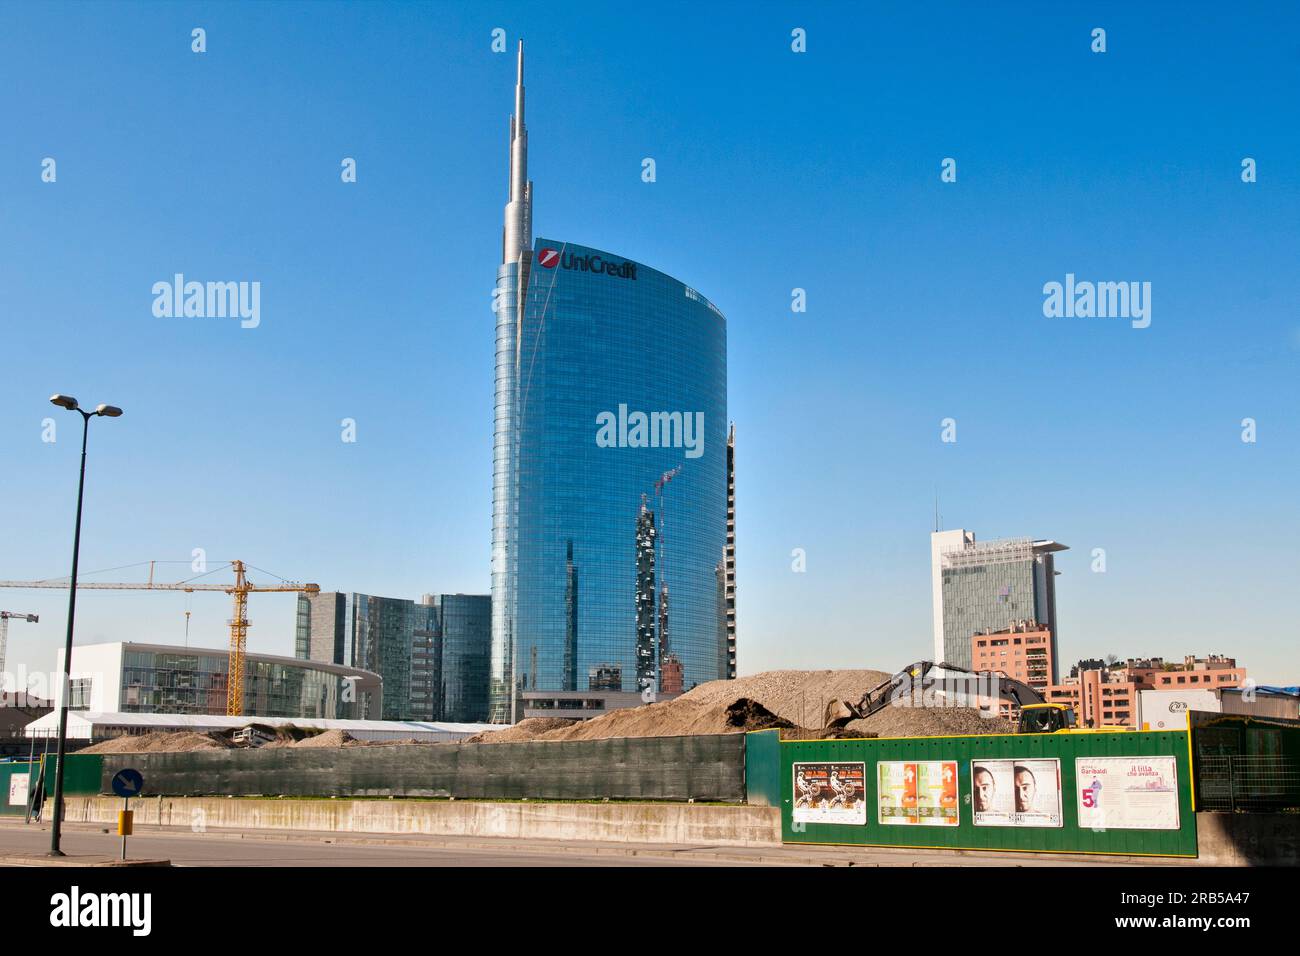 Torre unicredit. designed by cesar pirelli. porta nuova project. business center of Milan Stock Photo